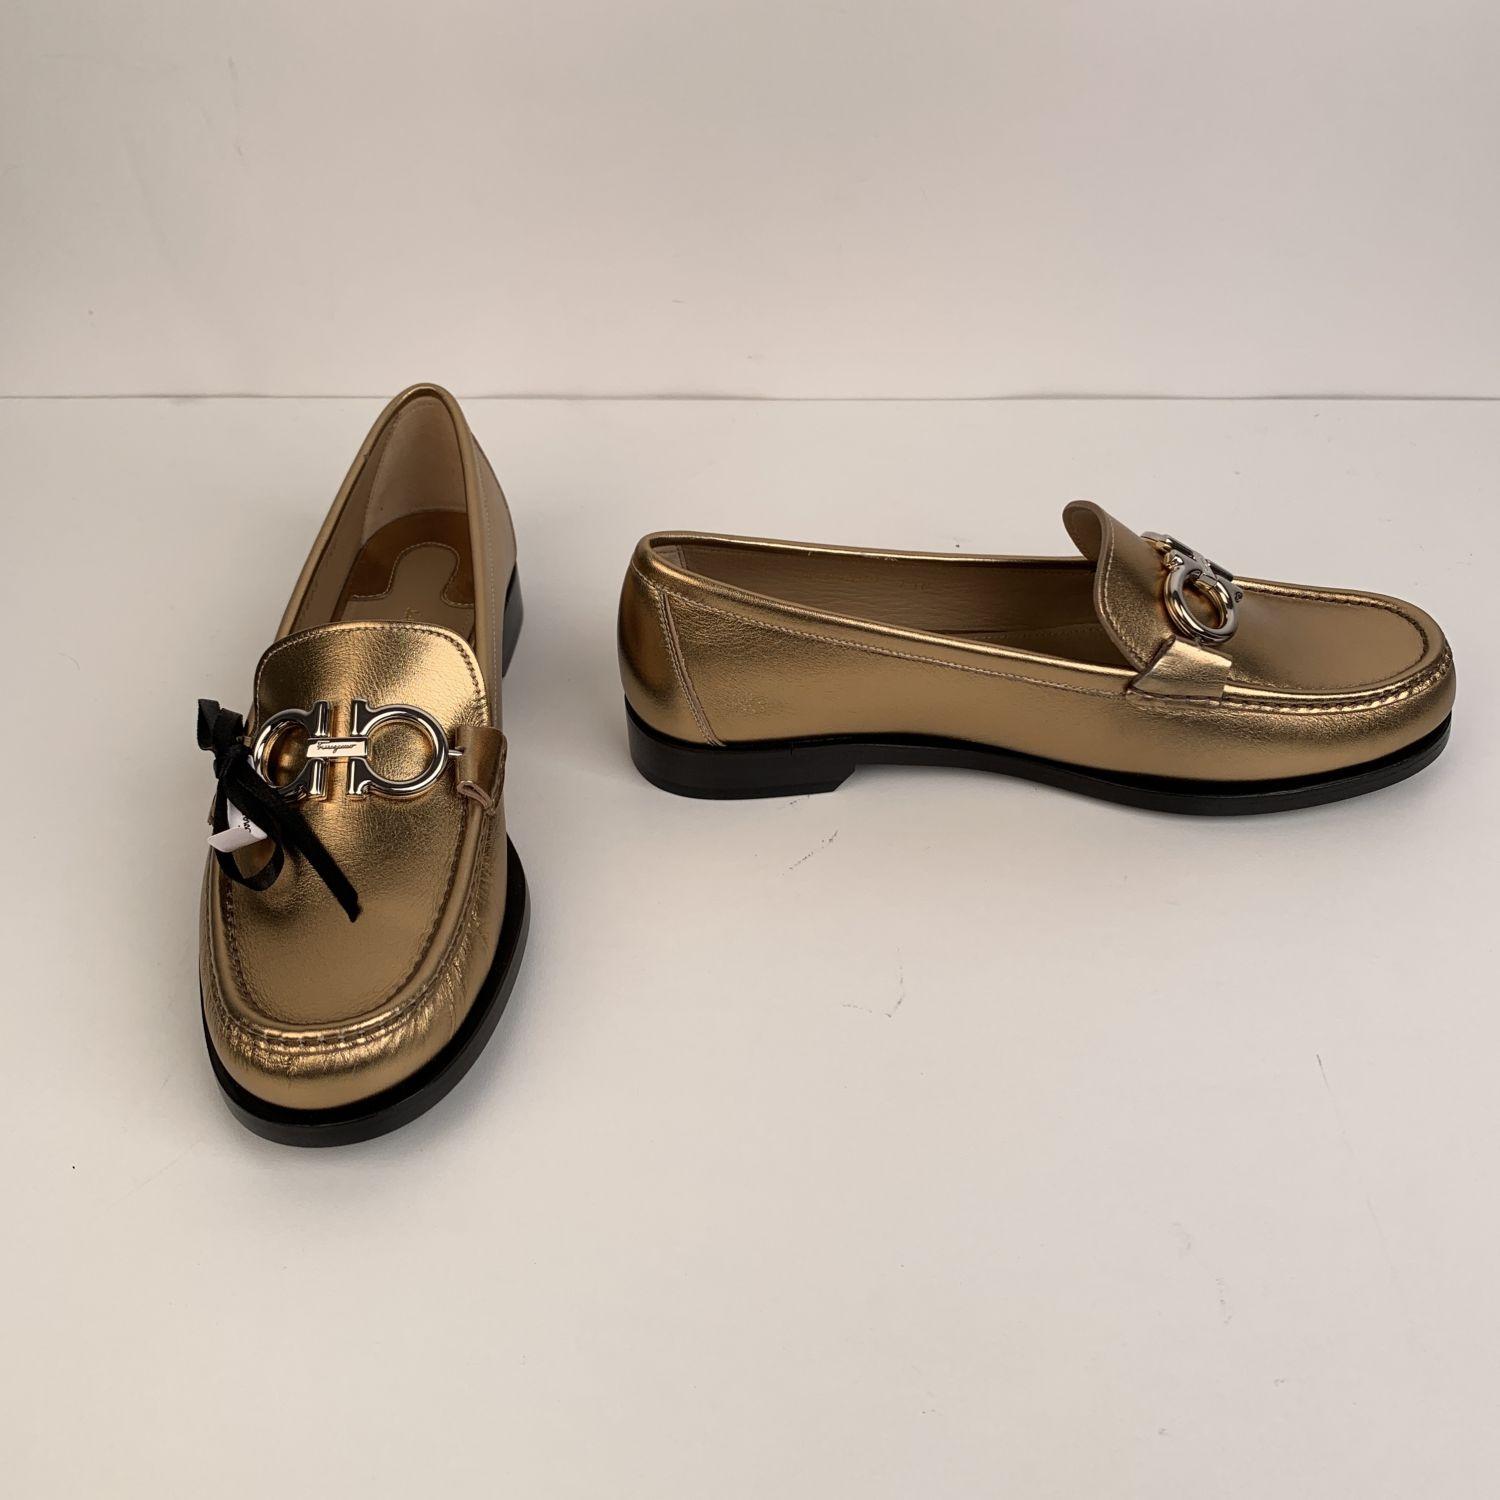 Classic Salvatore Ferragamo 'Rolo' Moccassins Loafers Shoes. Crafted in gold tone leather, they feature a round toe, gold metal Gancini detailing on the toes and slip-on design. Leather sole. Padded insole. Heels height: 1cm. Made in Italy. Size: US